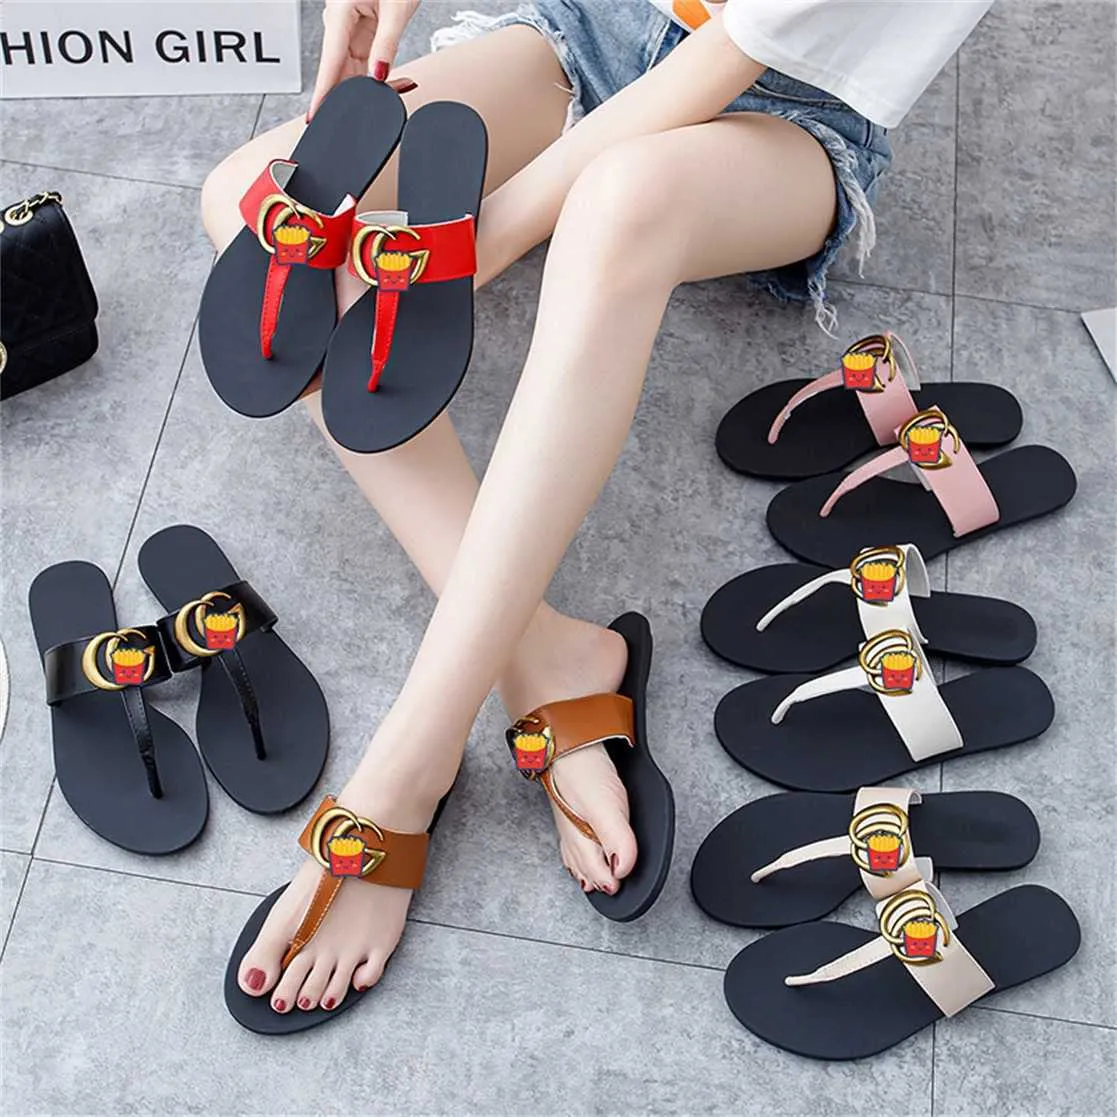 22% OFF Designer shoes G word female Fan womens sandals slippers summer fashion